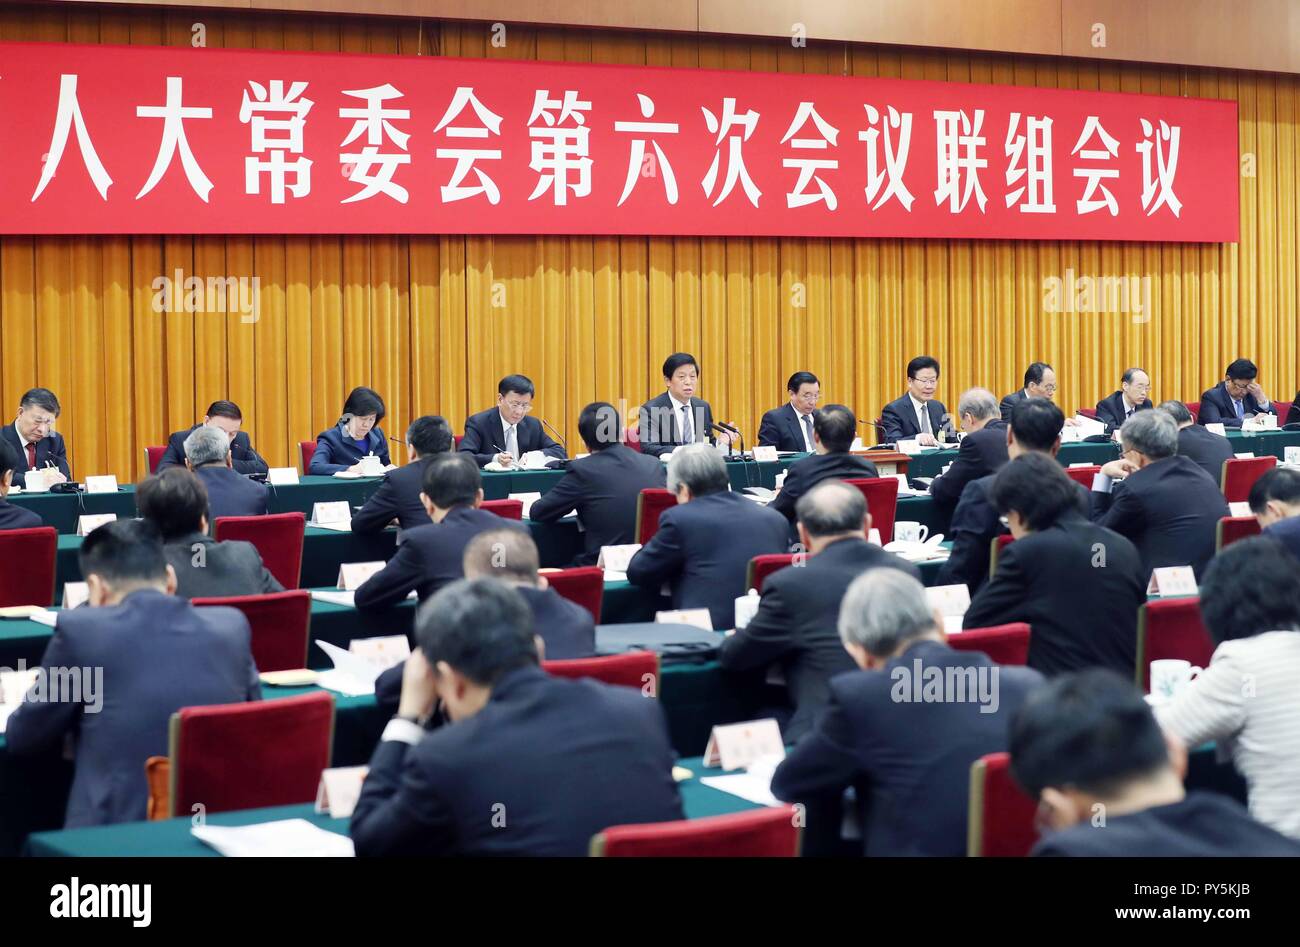 (181025) -- BEIJING, Oct. 25, 2018 (Xinhua) -- The National People's Congress (NPC) Standing Committee holds a special inquiry on two work reports submitted by the Supreme People's Court (SPC) and the Supreme People's Procuratorate (SPP), respectively, during a bimonthly session of the NPC Standing Committee, in Beijing, capital of China, Oct 25, 2018. The two reports were on the court efforts in enforcing judgments, and procuratorates' supervision of civil lawsuits and judgment enforcement, respectively. Li Zhanshu, chairman of the NPC Standing Committee, attended the inquiry and deliberation Stock Photo